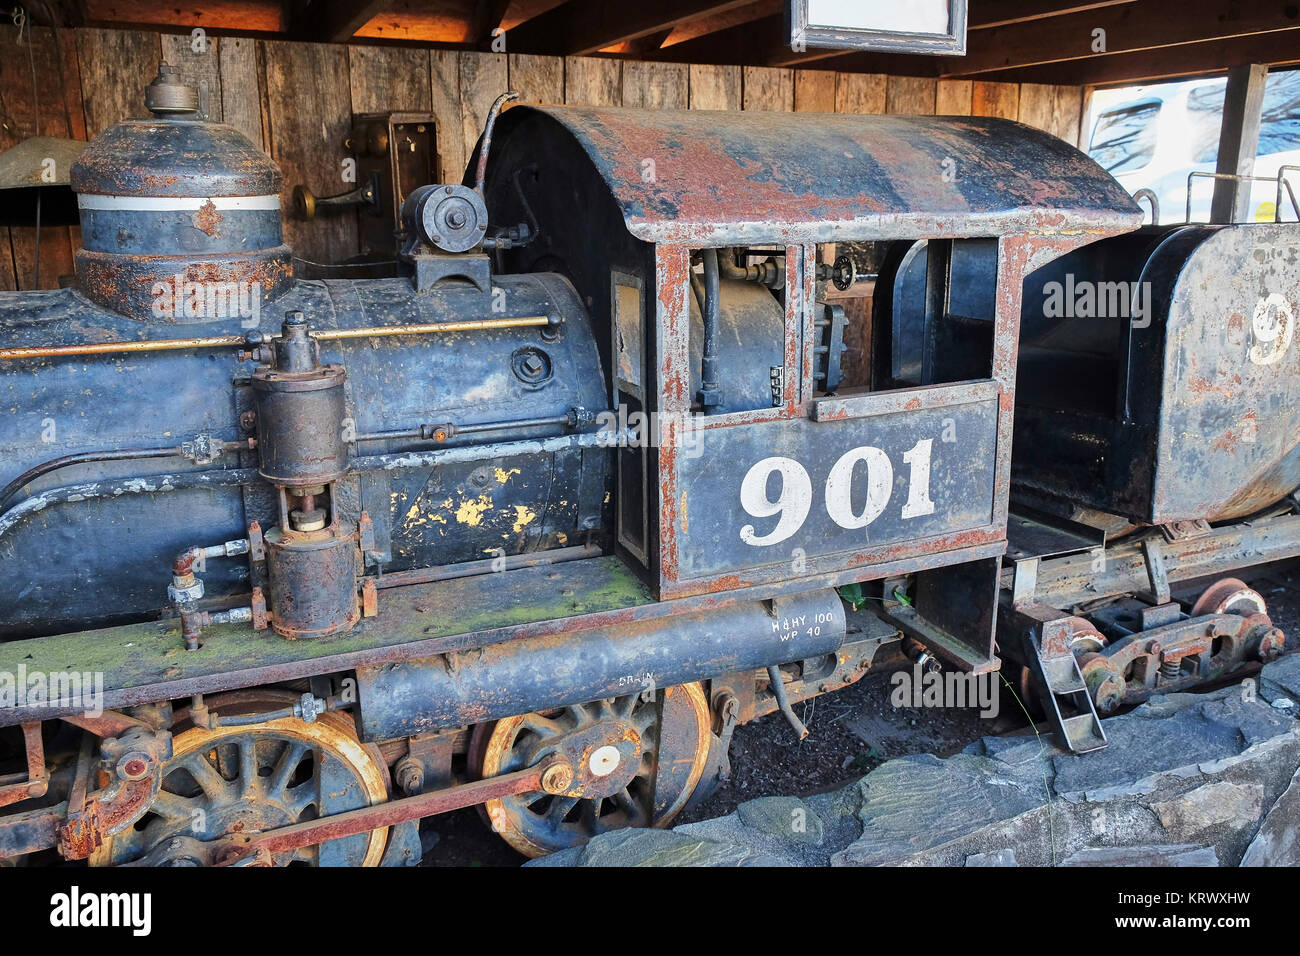 Narrow gauge 2-6-0 steam locomotive used in the 1950's for low clearance duties in Arkansas diamond mines, in disrepair, found in Warm Springs GA, USA Stock Photo